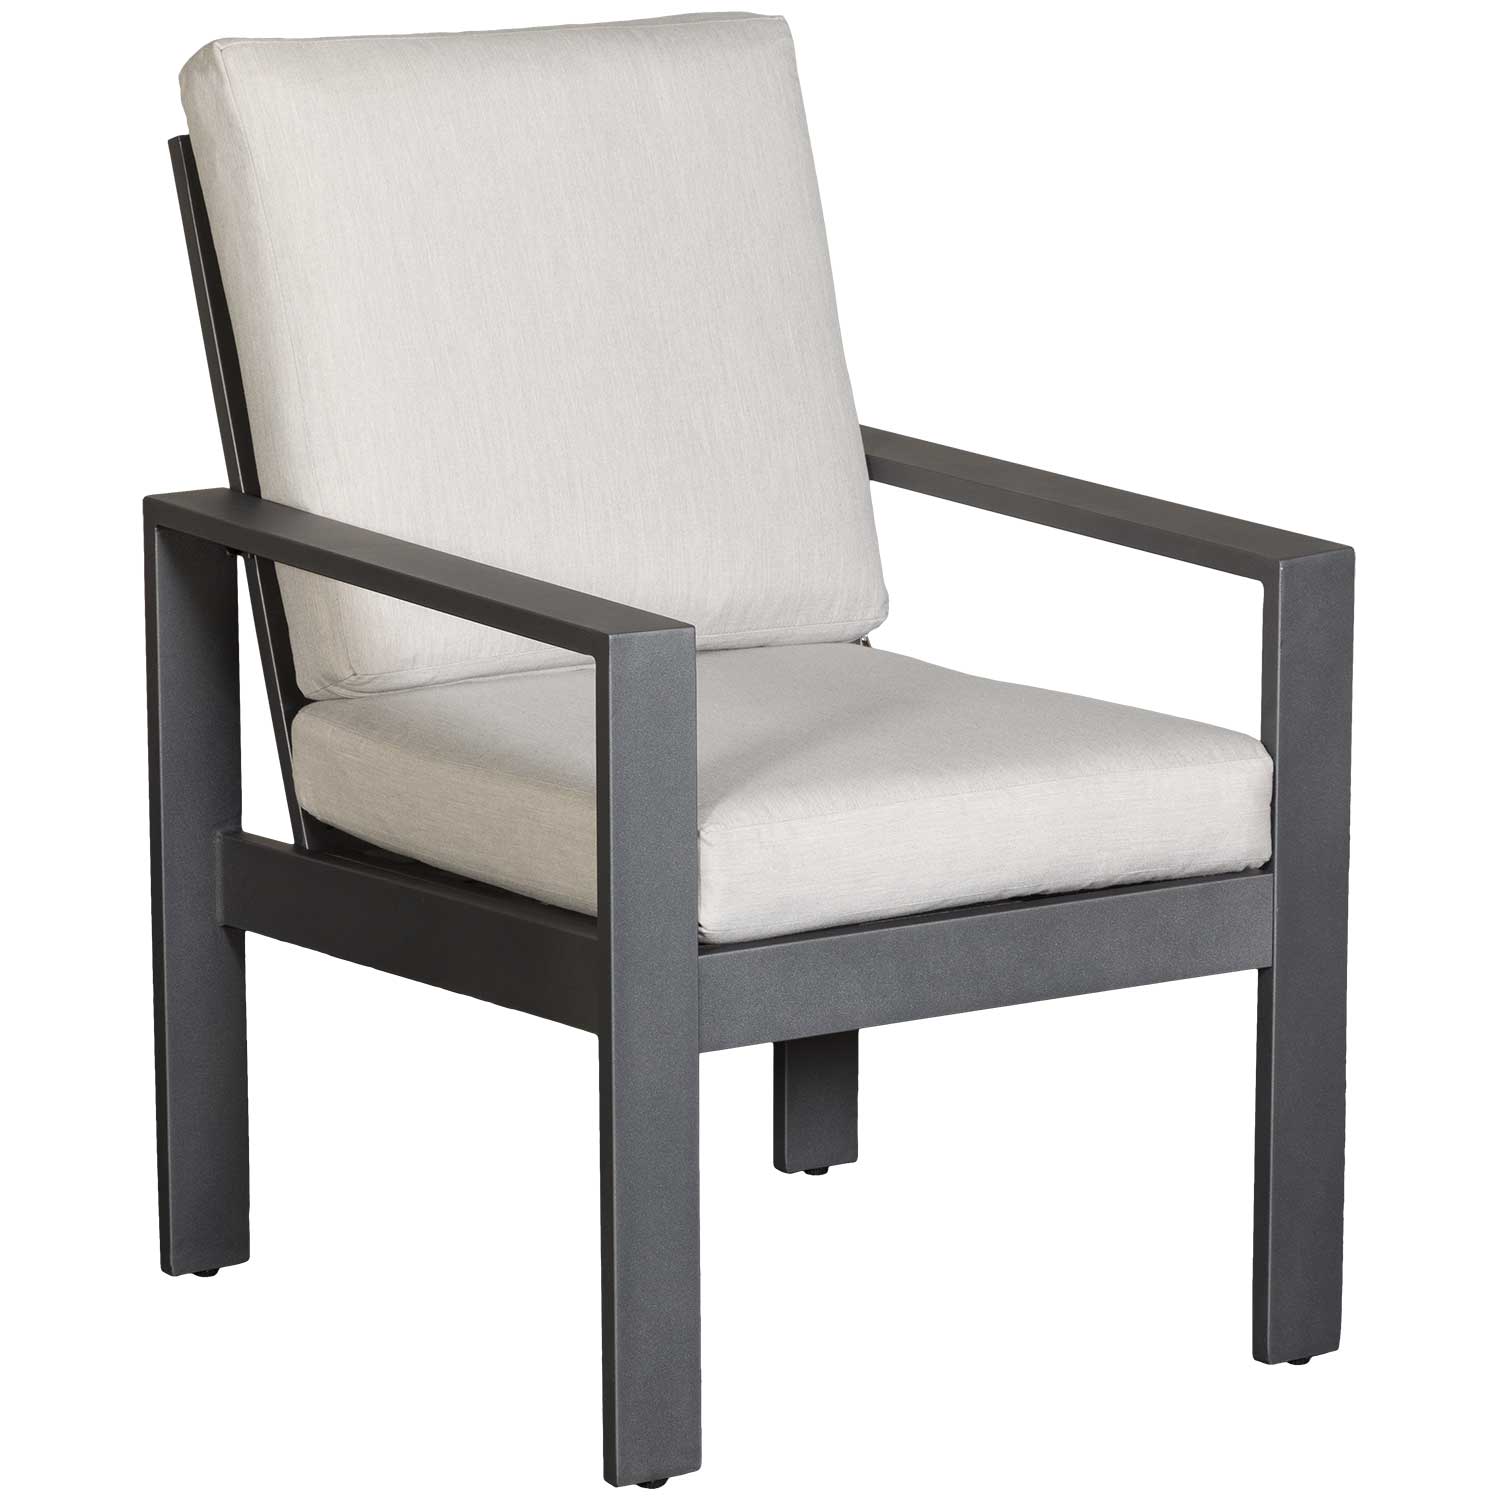 Alassio Grey Dining Chair With Cushion | ALAS-DC | Sessel